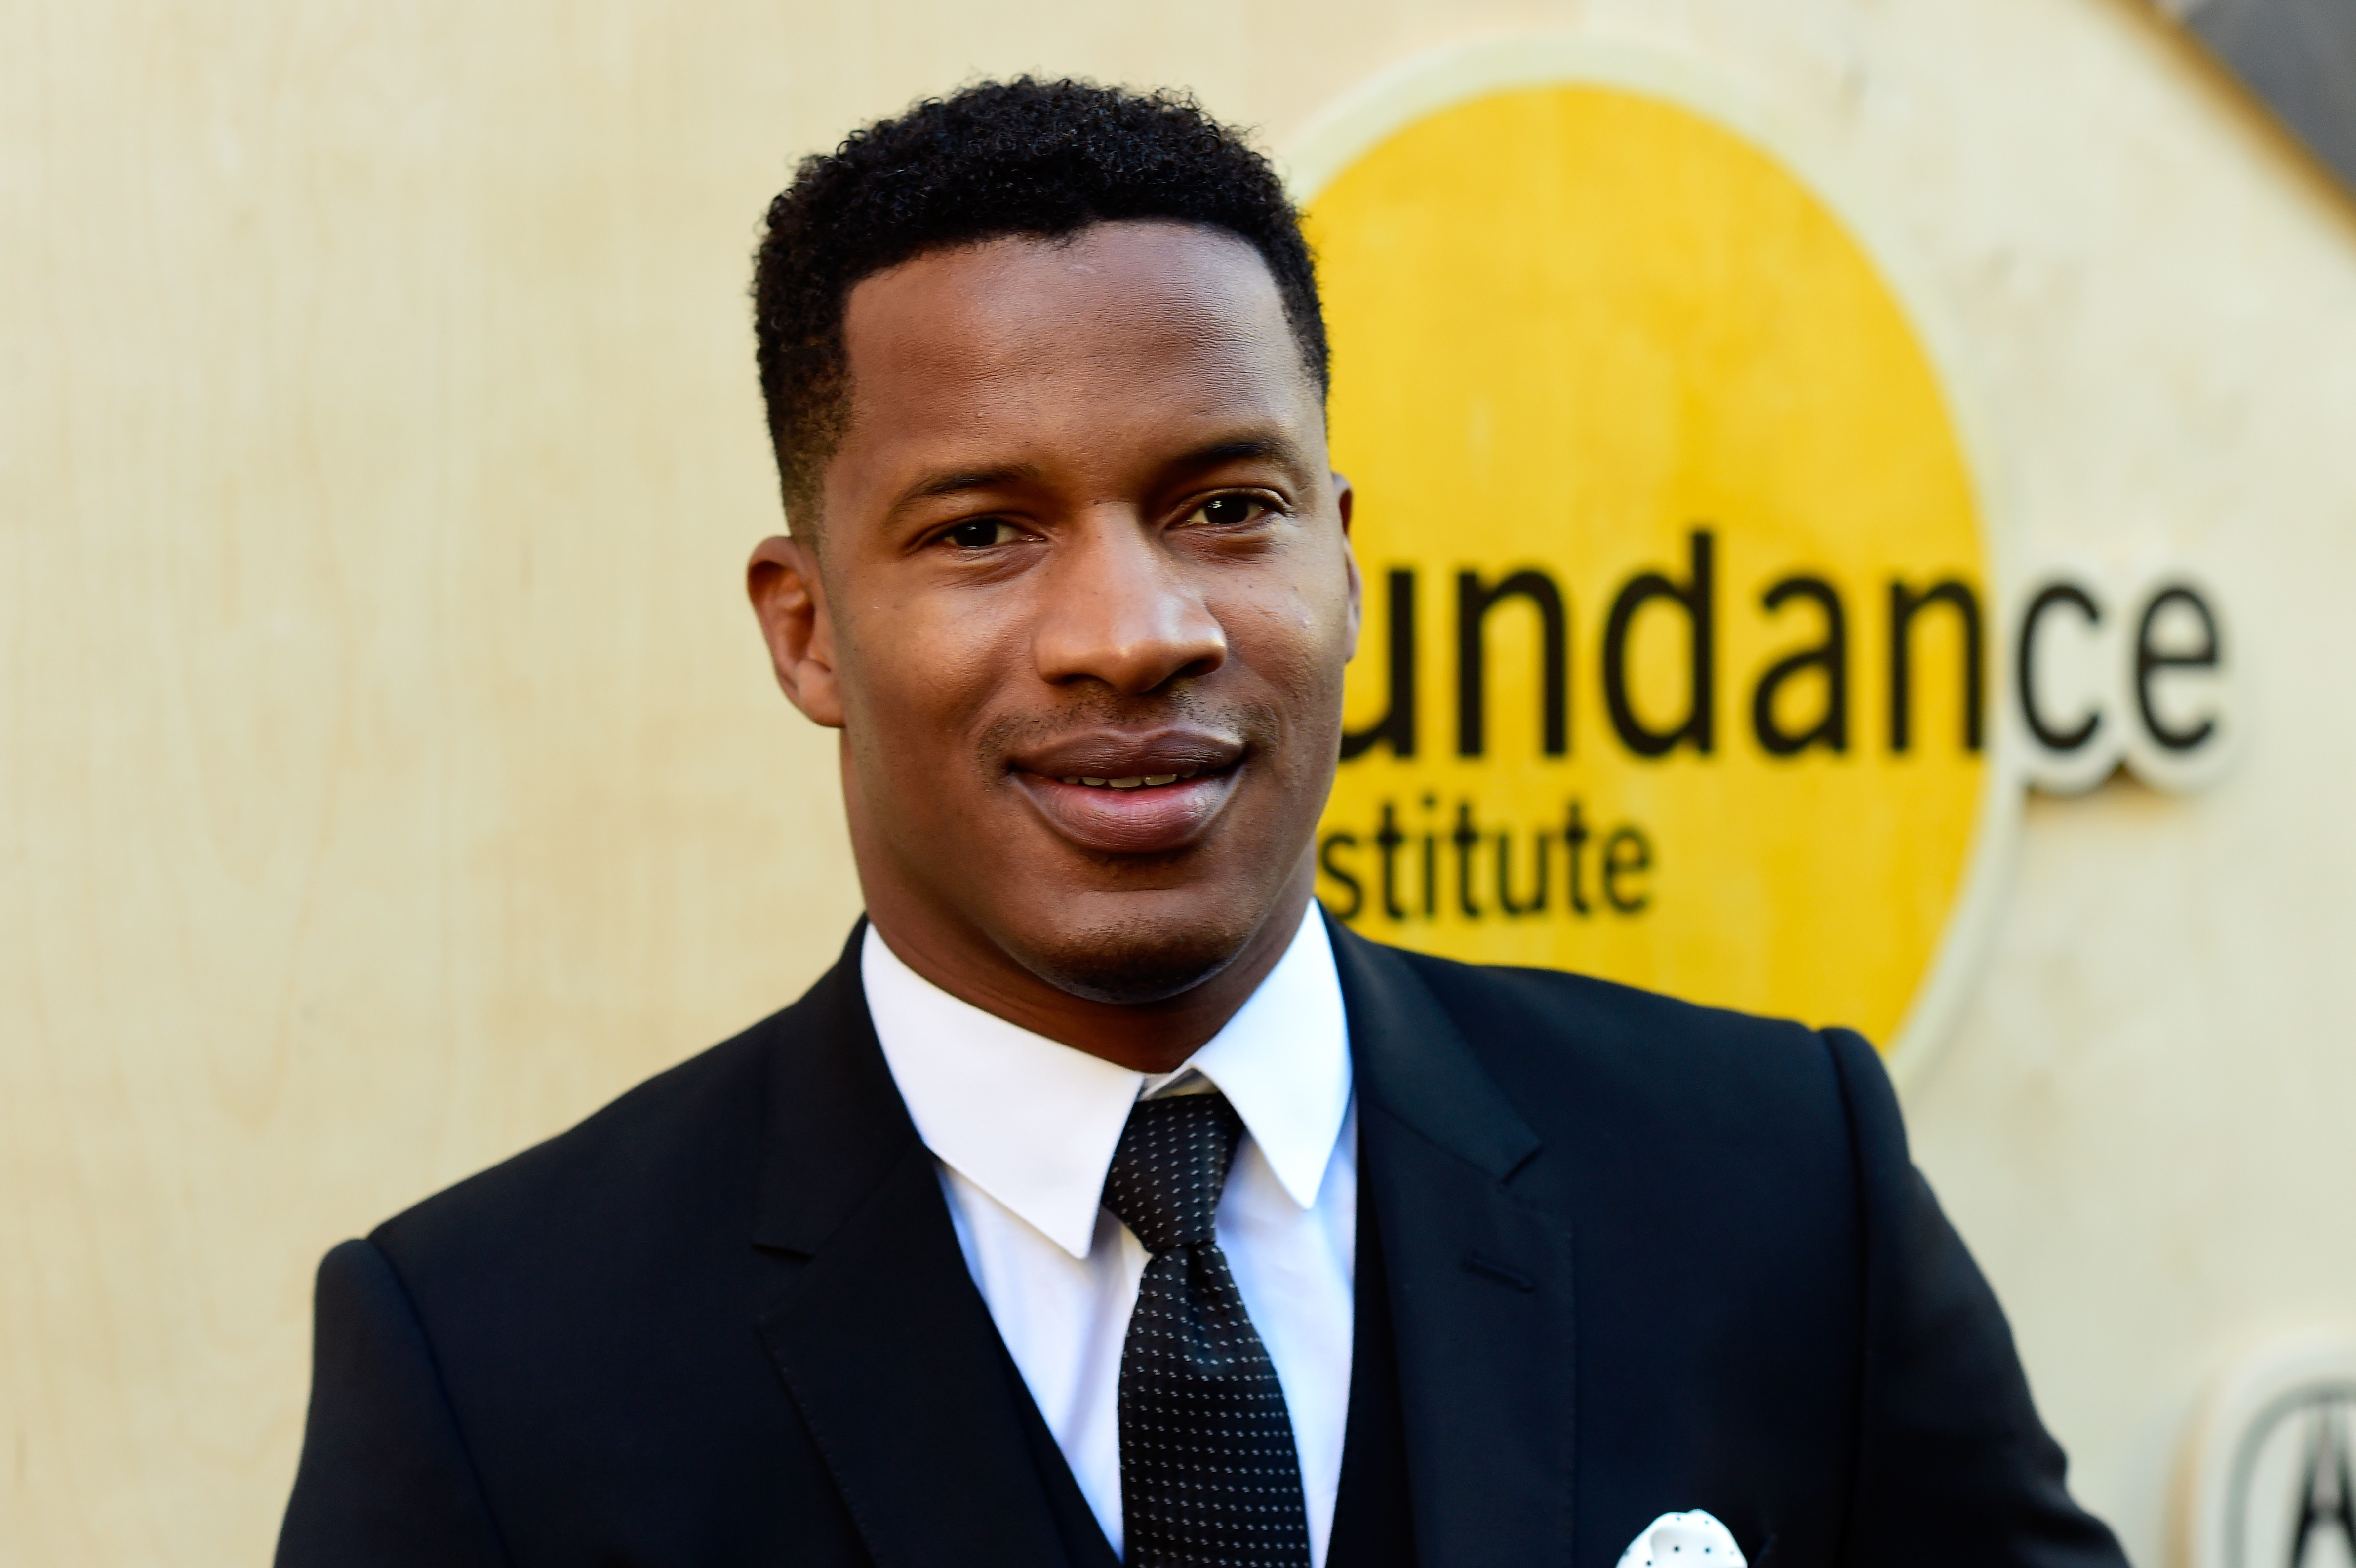 Nate Parker attends the Sundance Institute NIGHT BEFORE NEXT Benefit on August 11, 2016 in Los Angeles, California. (Frazer Harrison—WireImage/Getty Images)